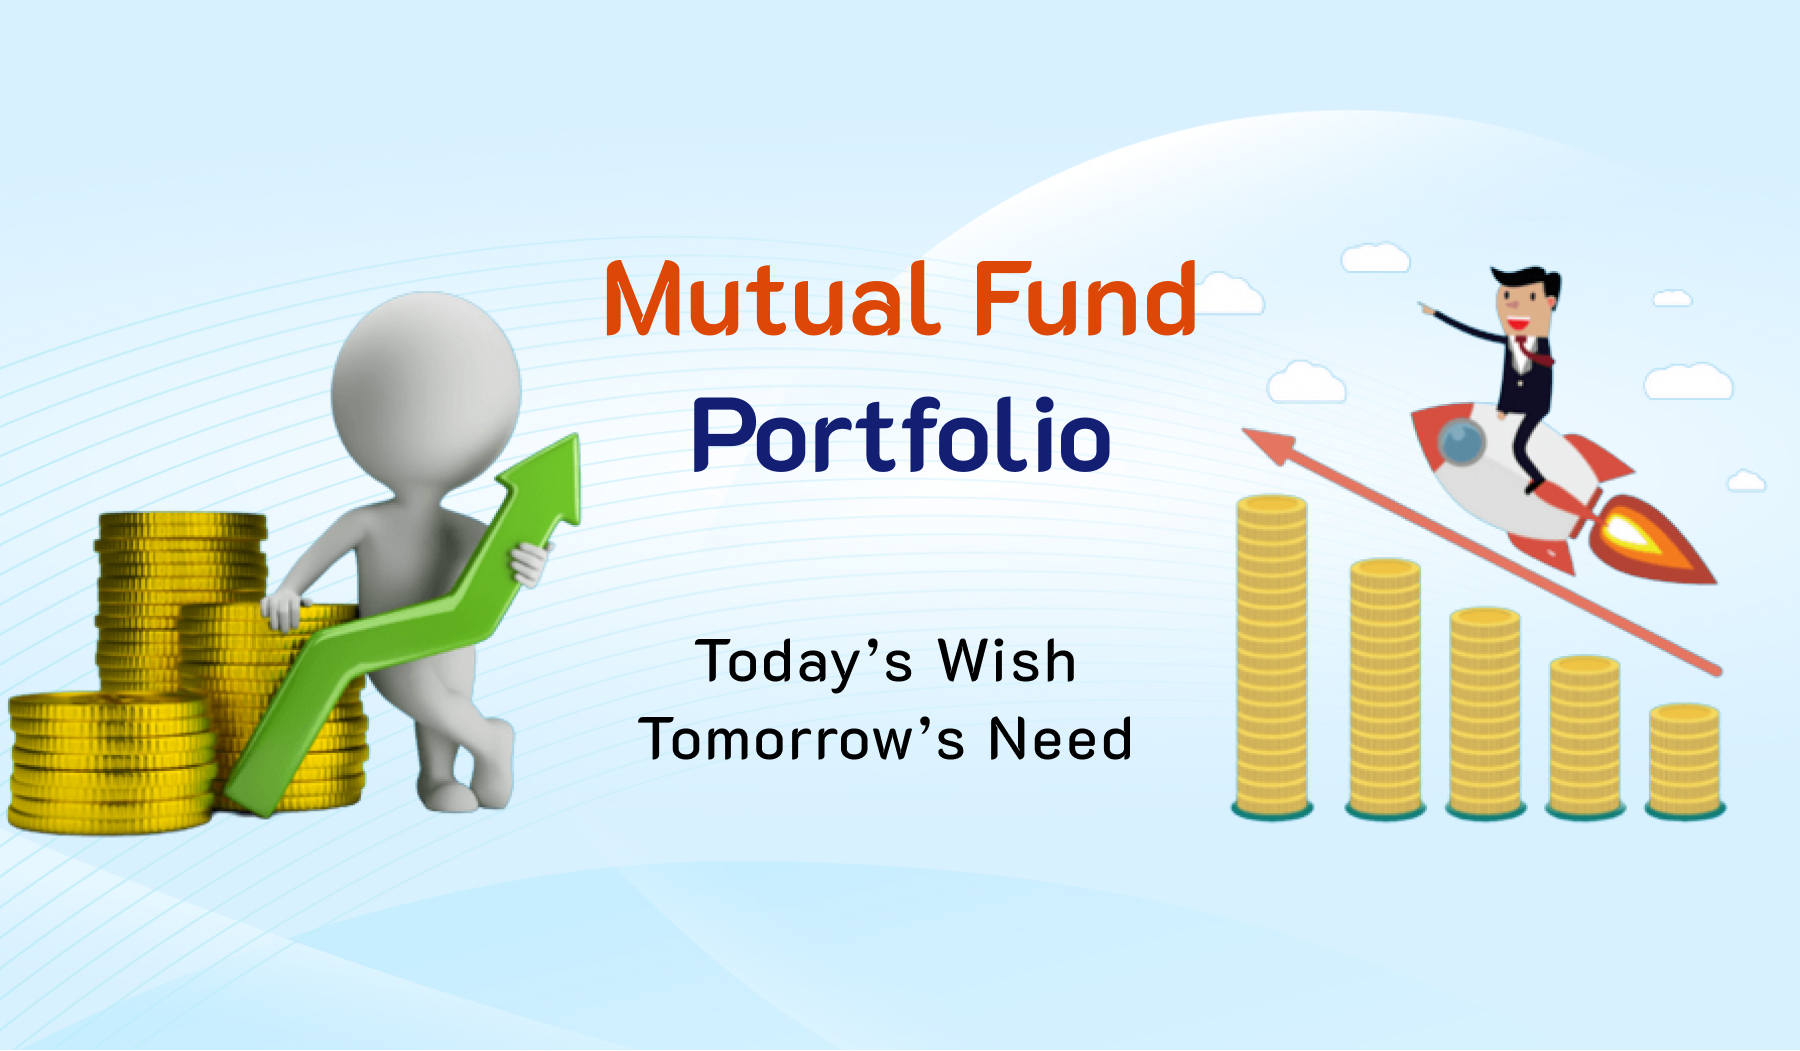 Flexi-cap funds work best for your mutual fund portfolio